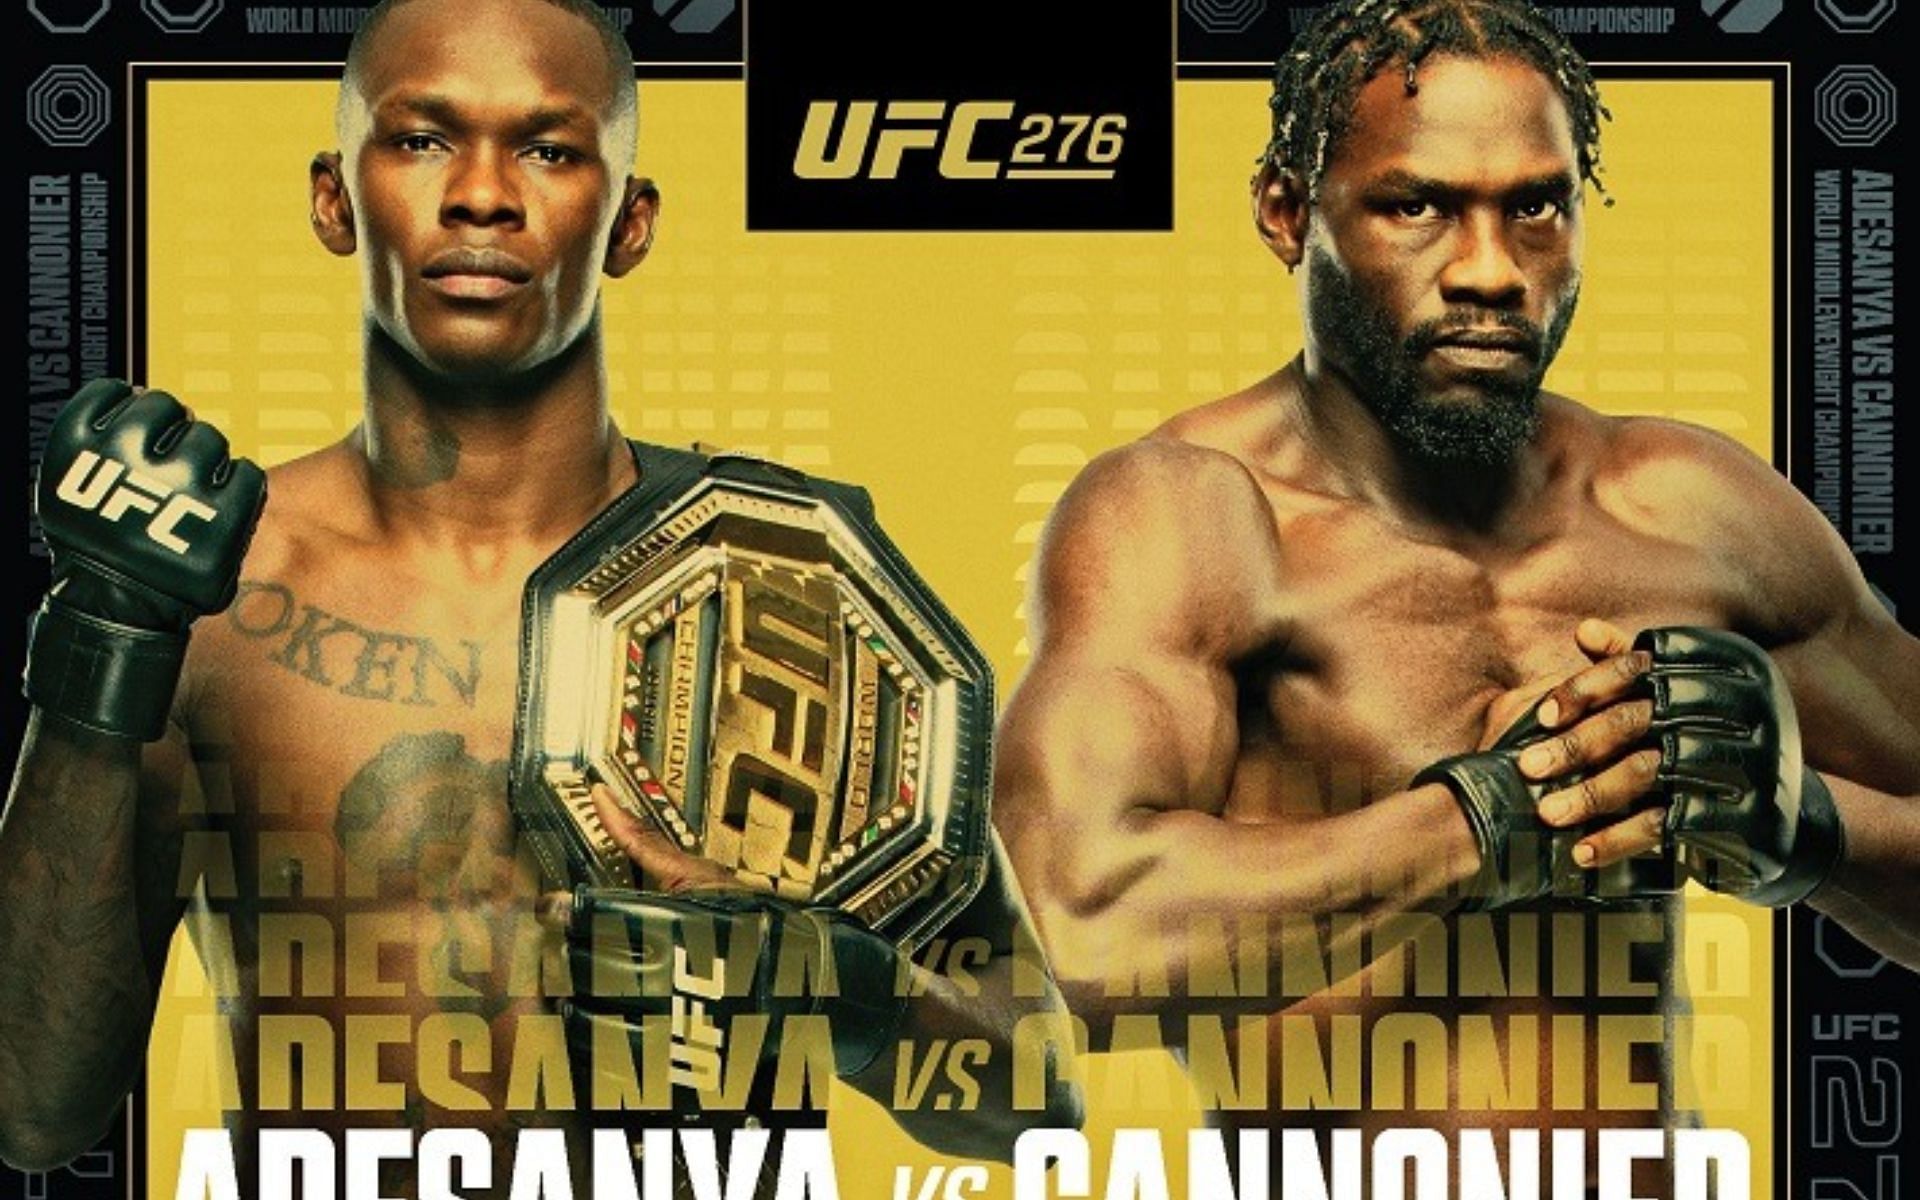 Israel Adesanya faces Jared Cannonier in a middleweight title bout this weekend